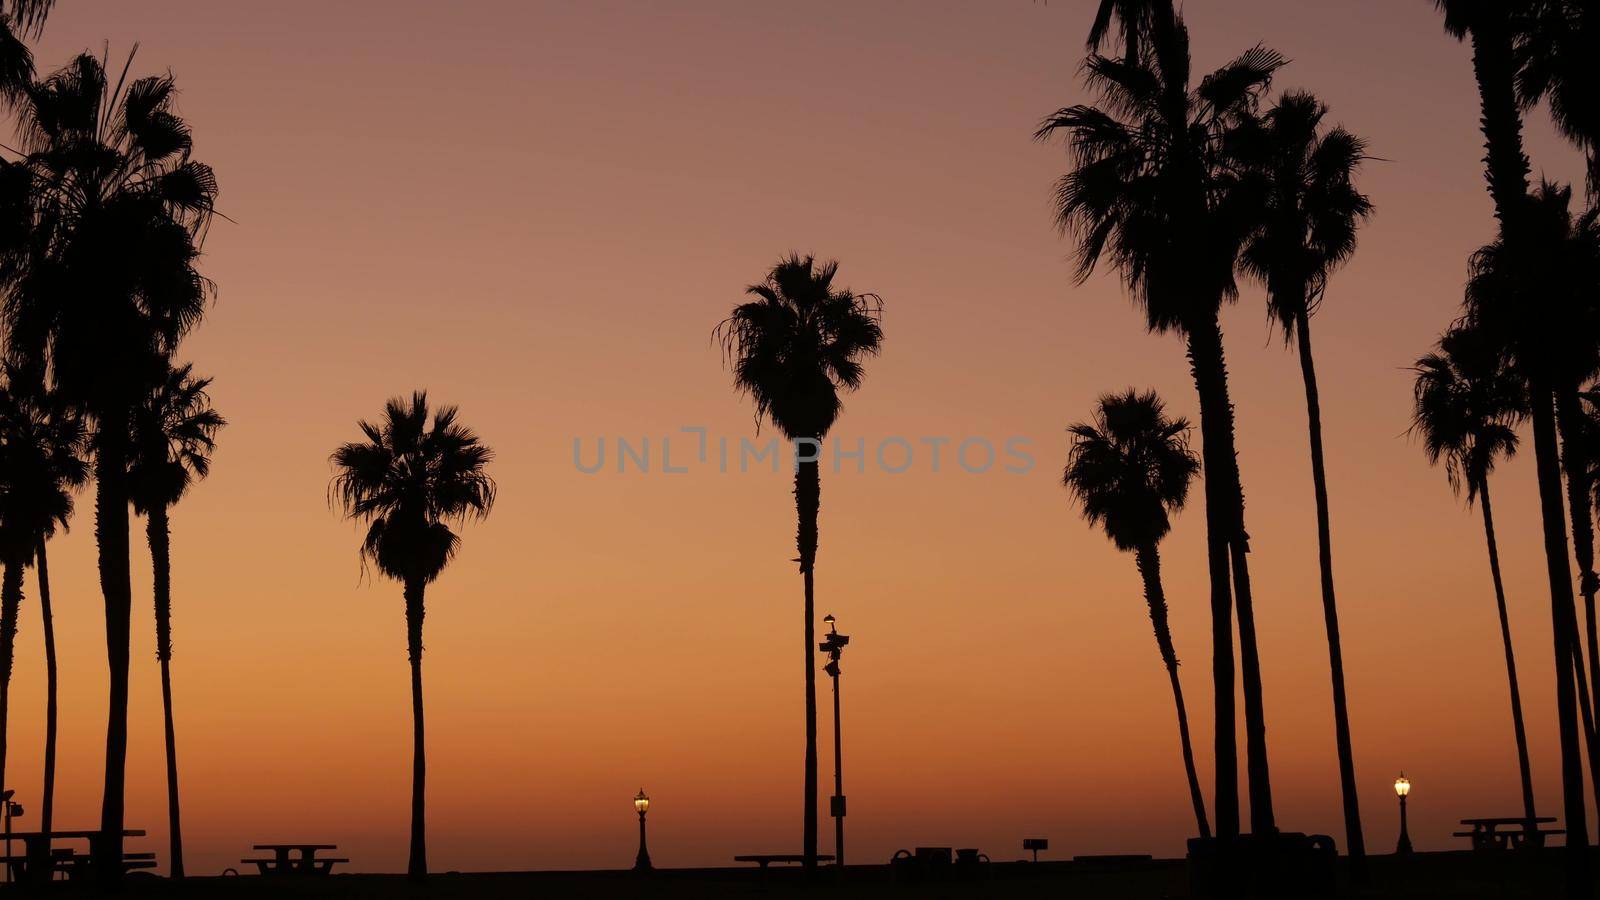 Silhouettes of people and palm trees on beach at sunset, California coast, USA. by DogoraSun